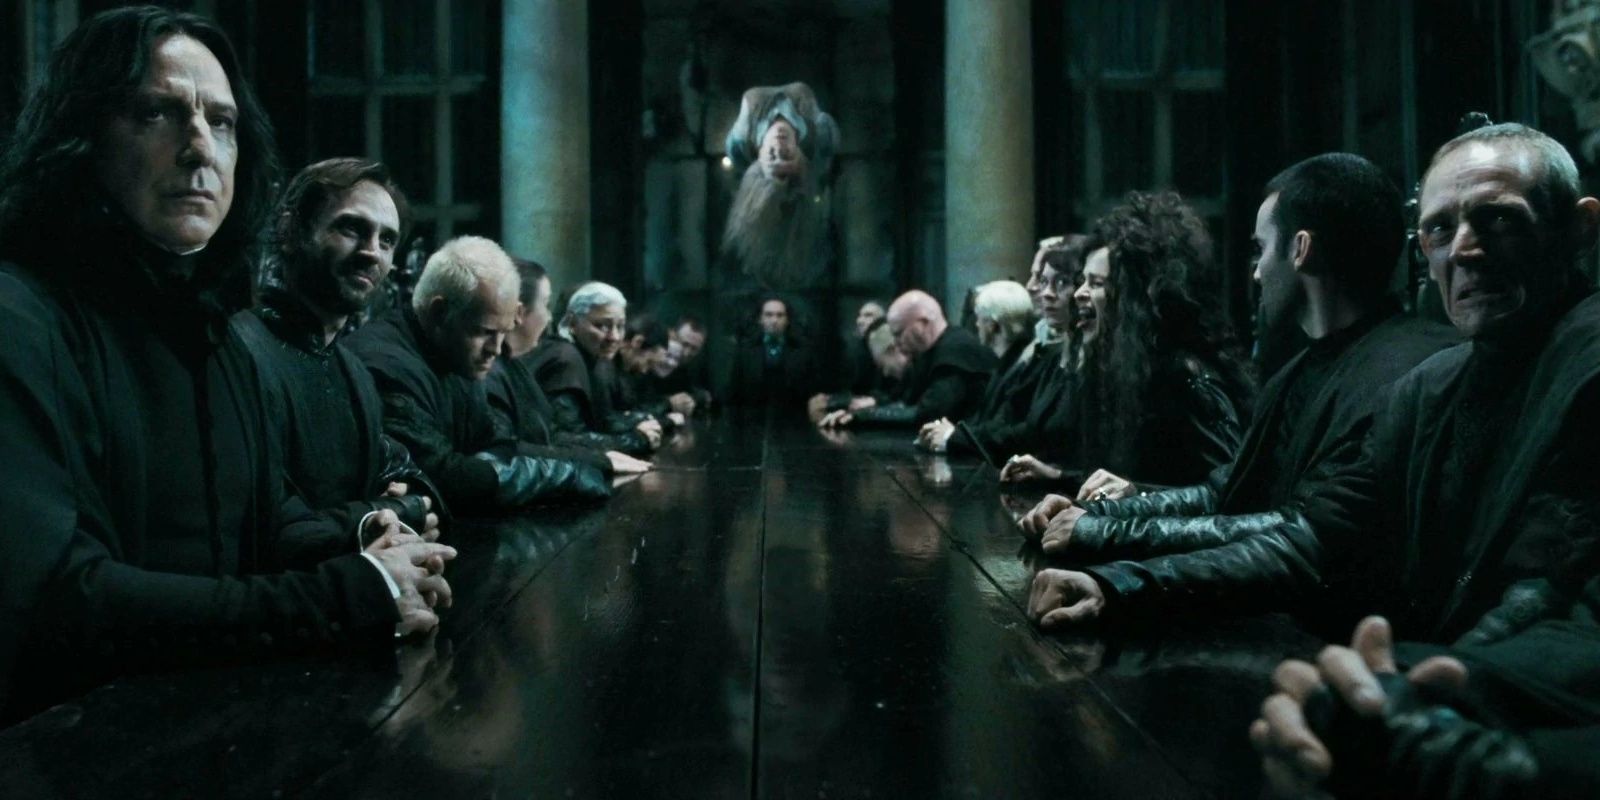 Charity Burbage's Death In Harry Potter and the Deathly Hallows-1 as the Death Eaters are gathered